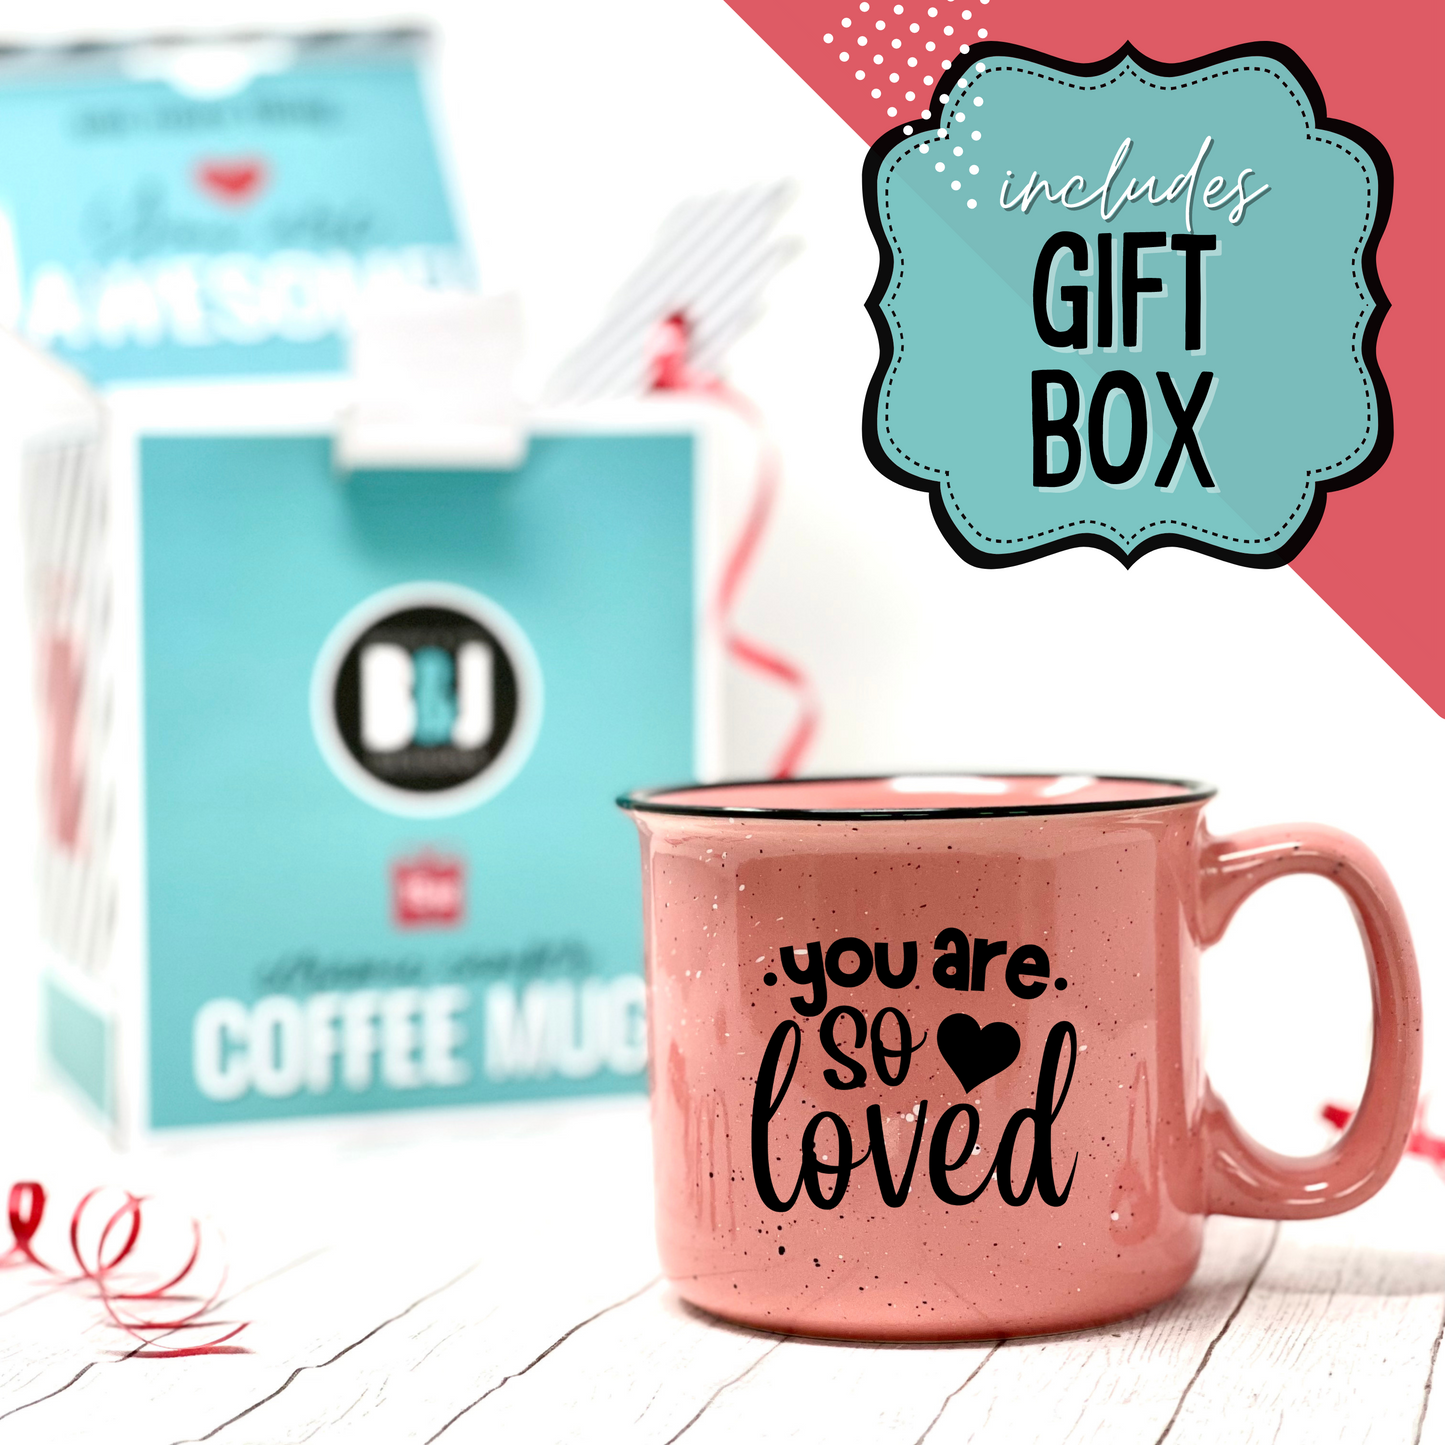 You Are Loved - Cute Coffee Mug for Women - White 14 oz Large Coffee Cup - Novelty Mug, Perfect Gift for Women, Mom, Coworker, Boss, Wife, Friend Under $25